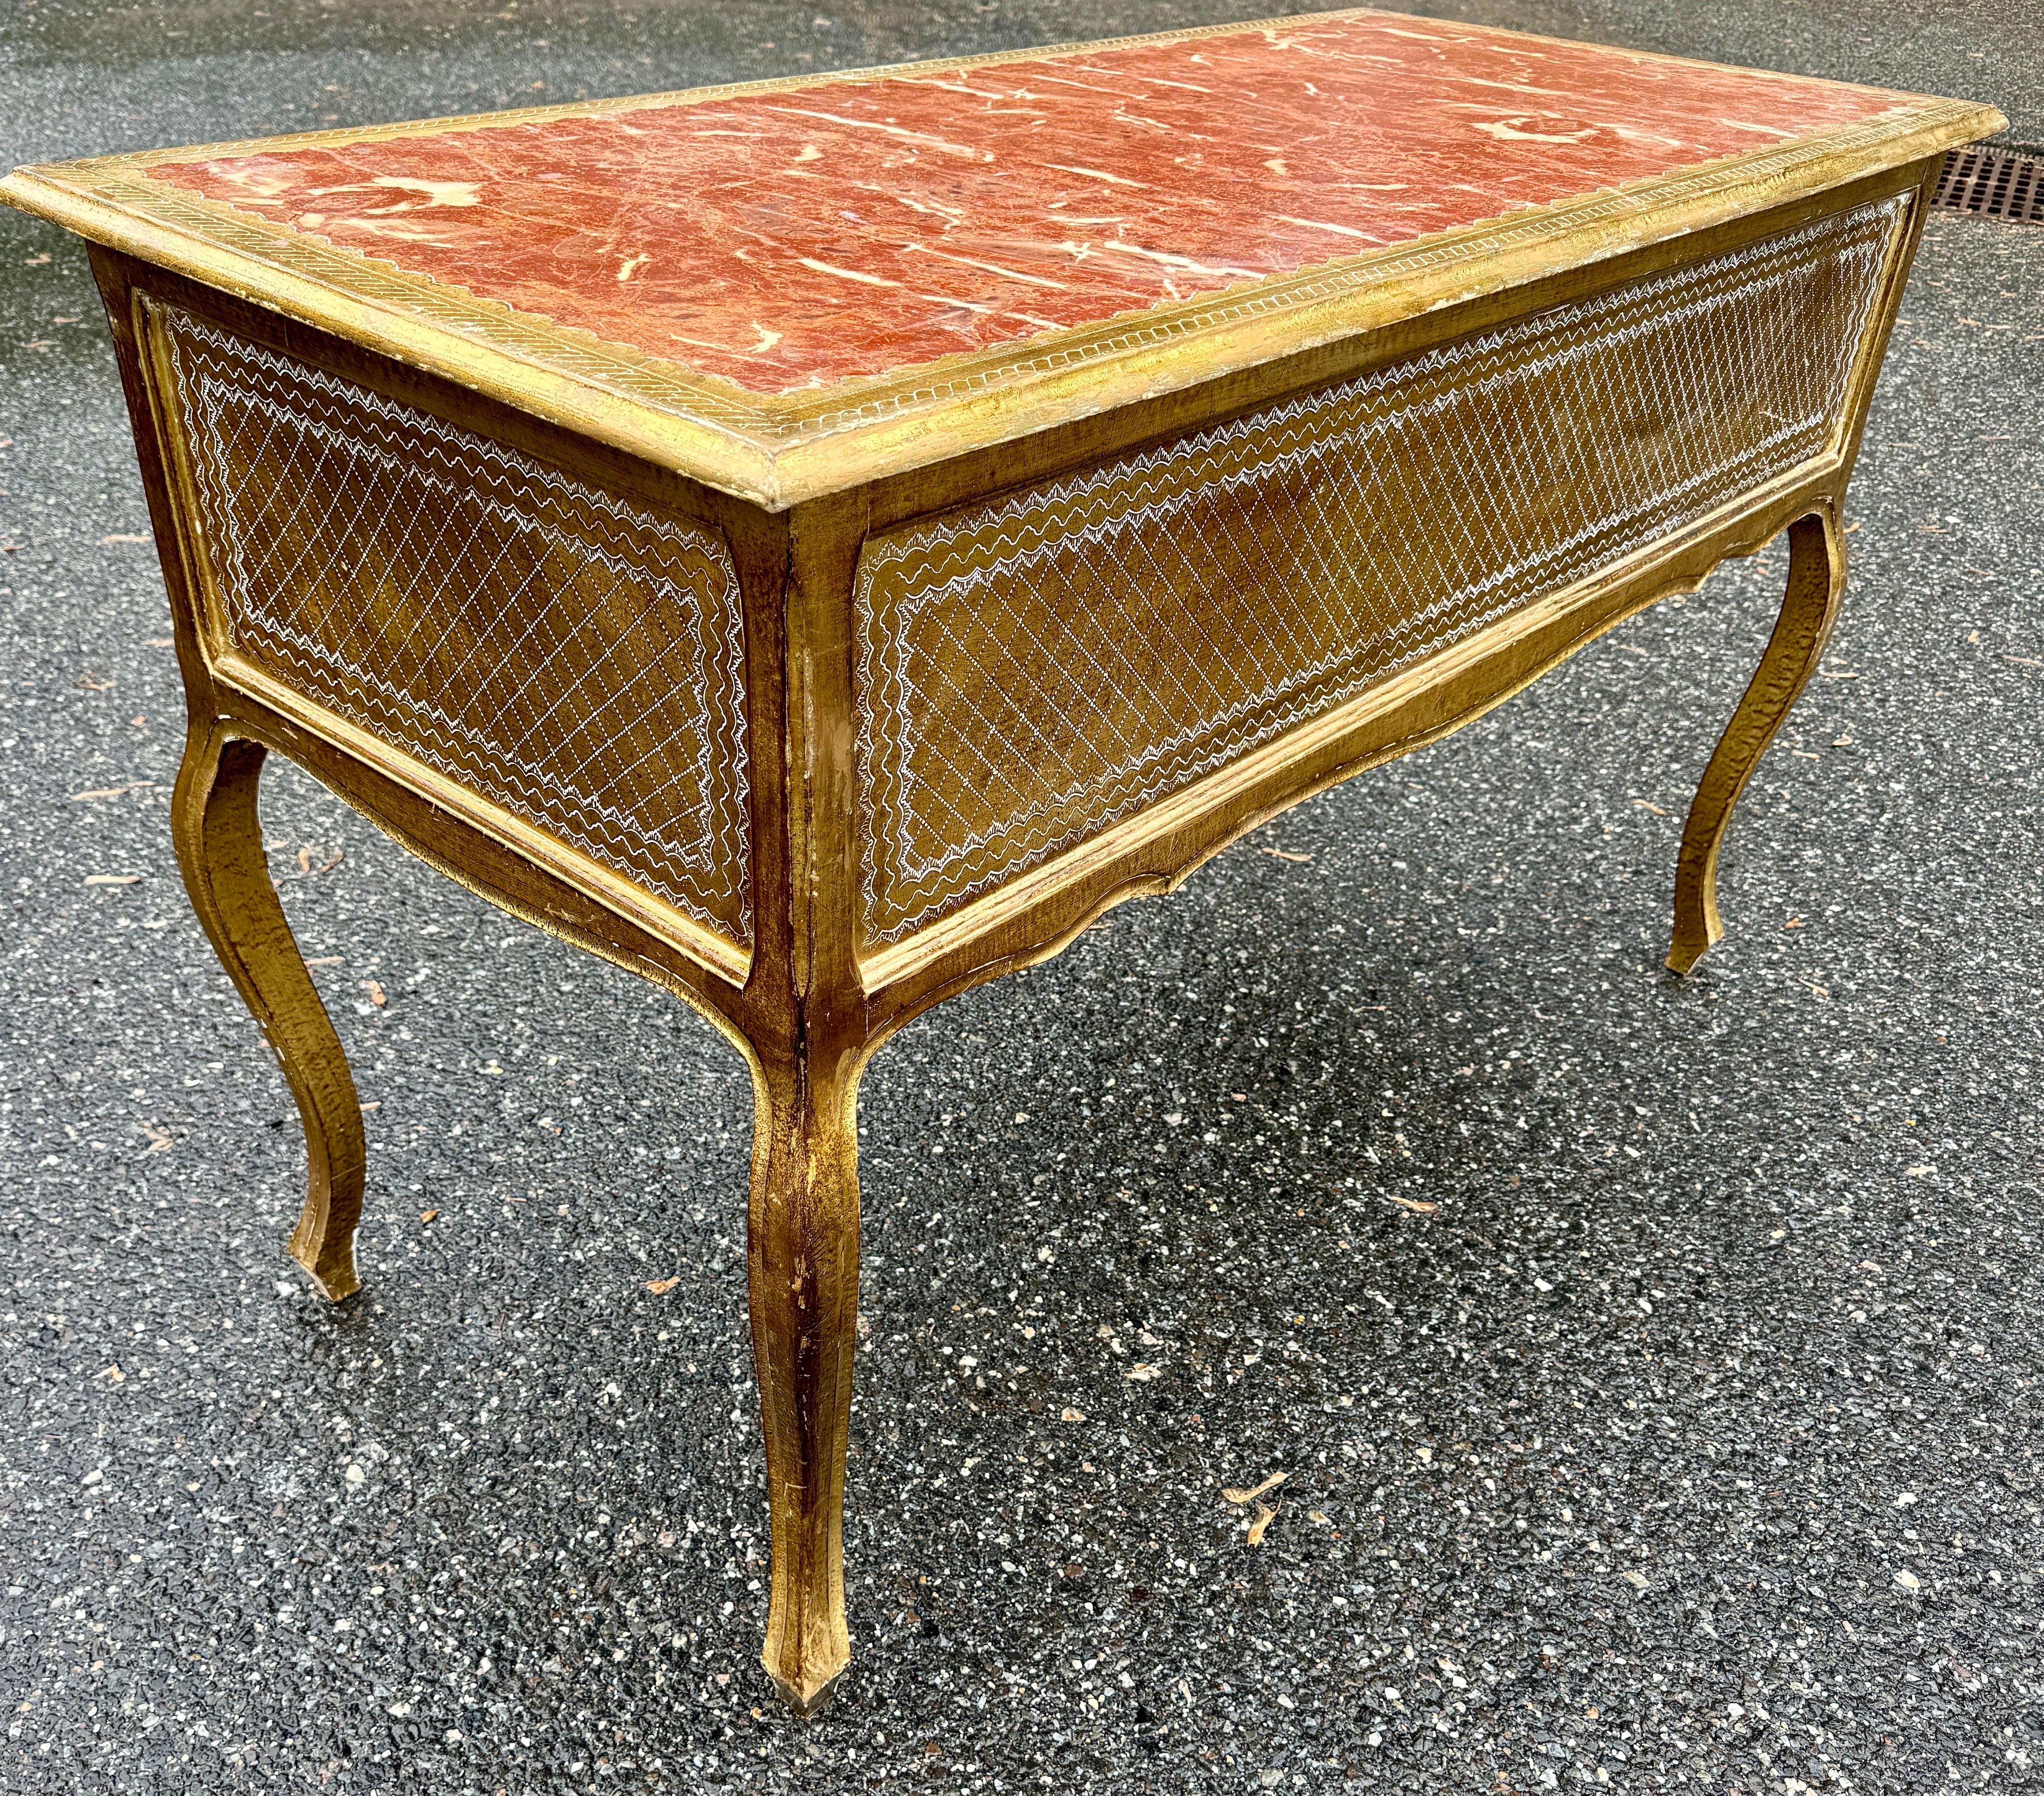 Italian Mid-Century Florentine Gilt Desk with Drawers For Sale 4